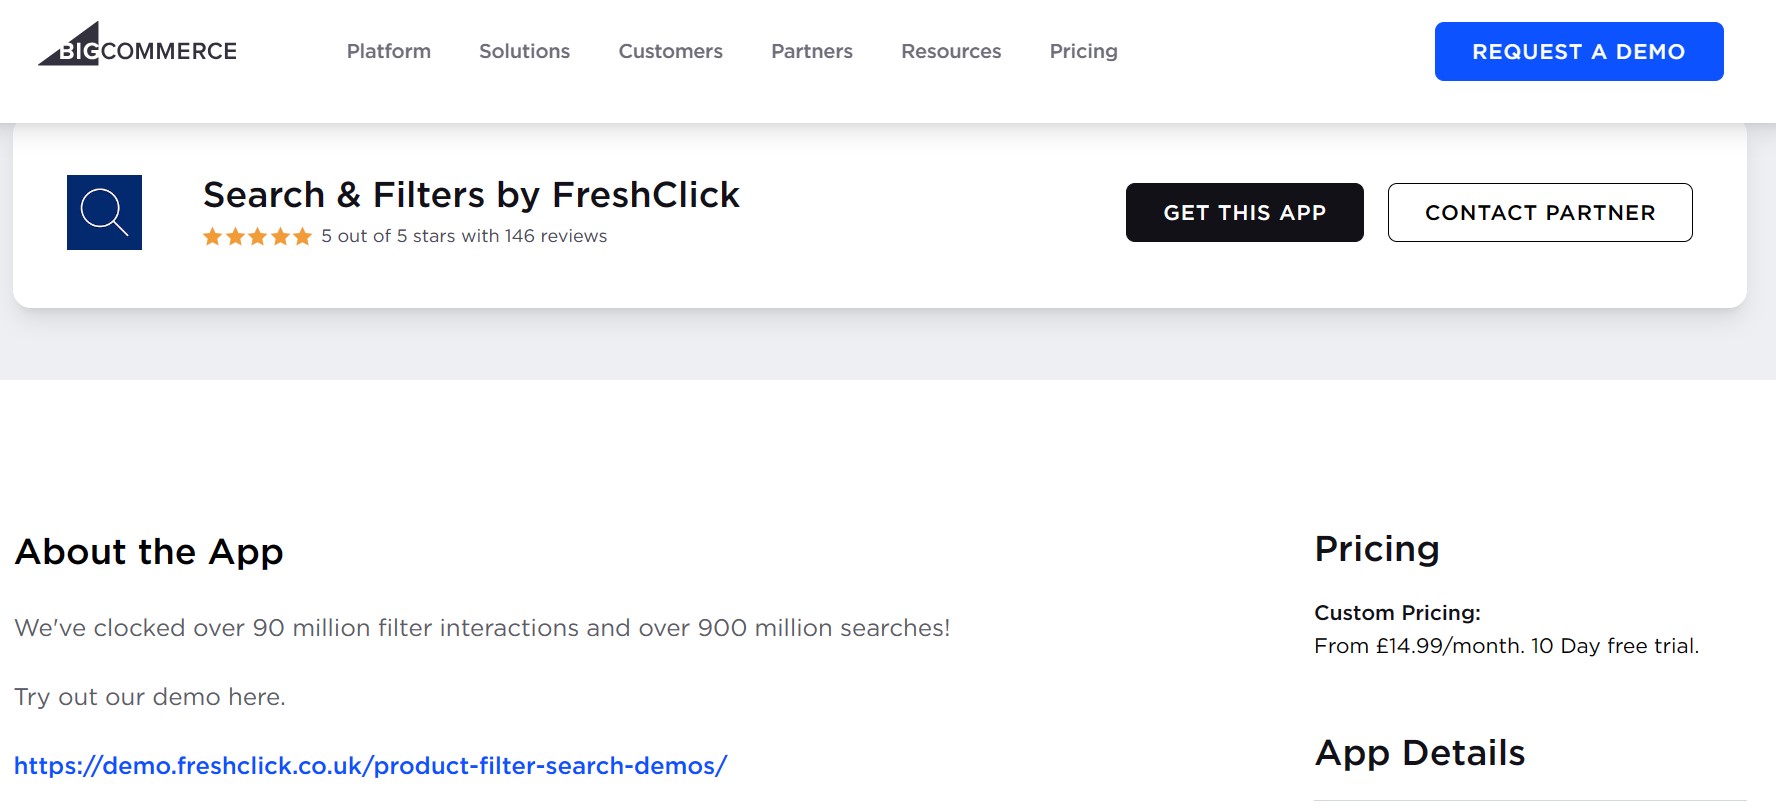 Search & Filters by FreshClick